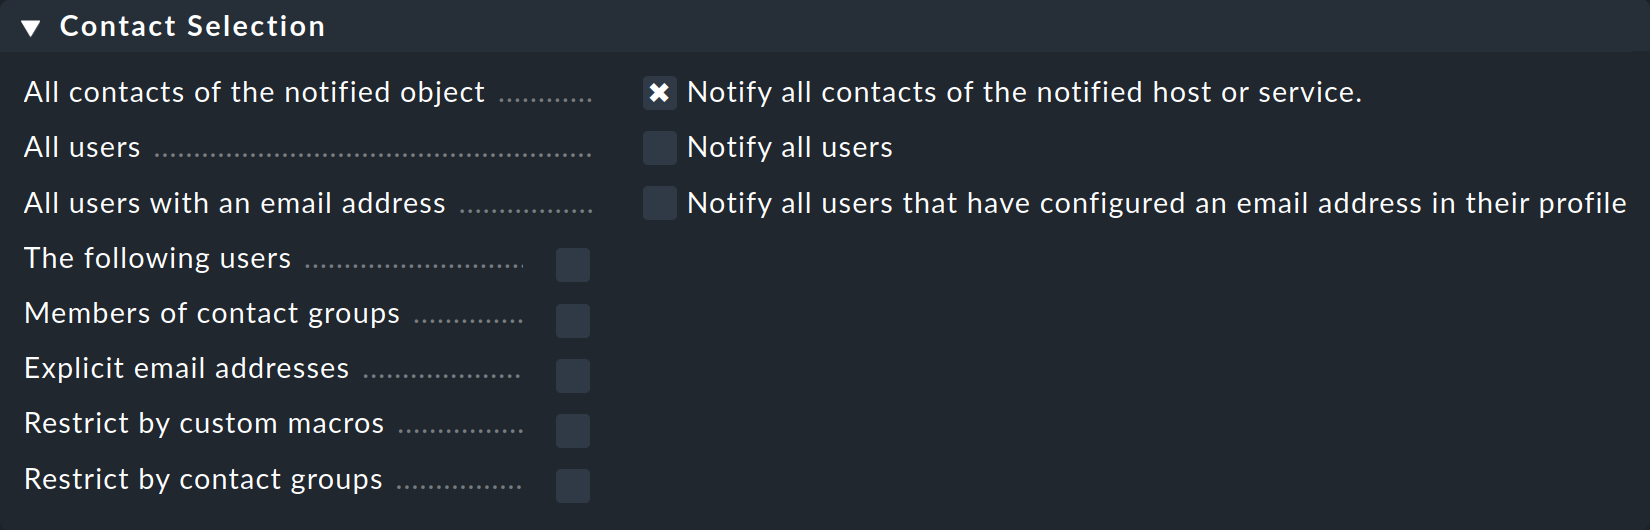 Rule with contact selection options.